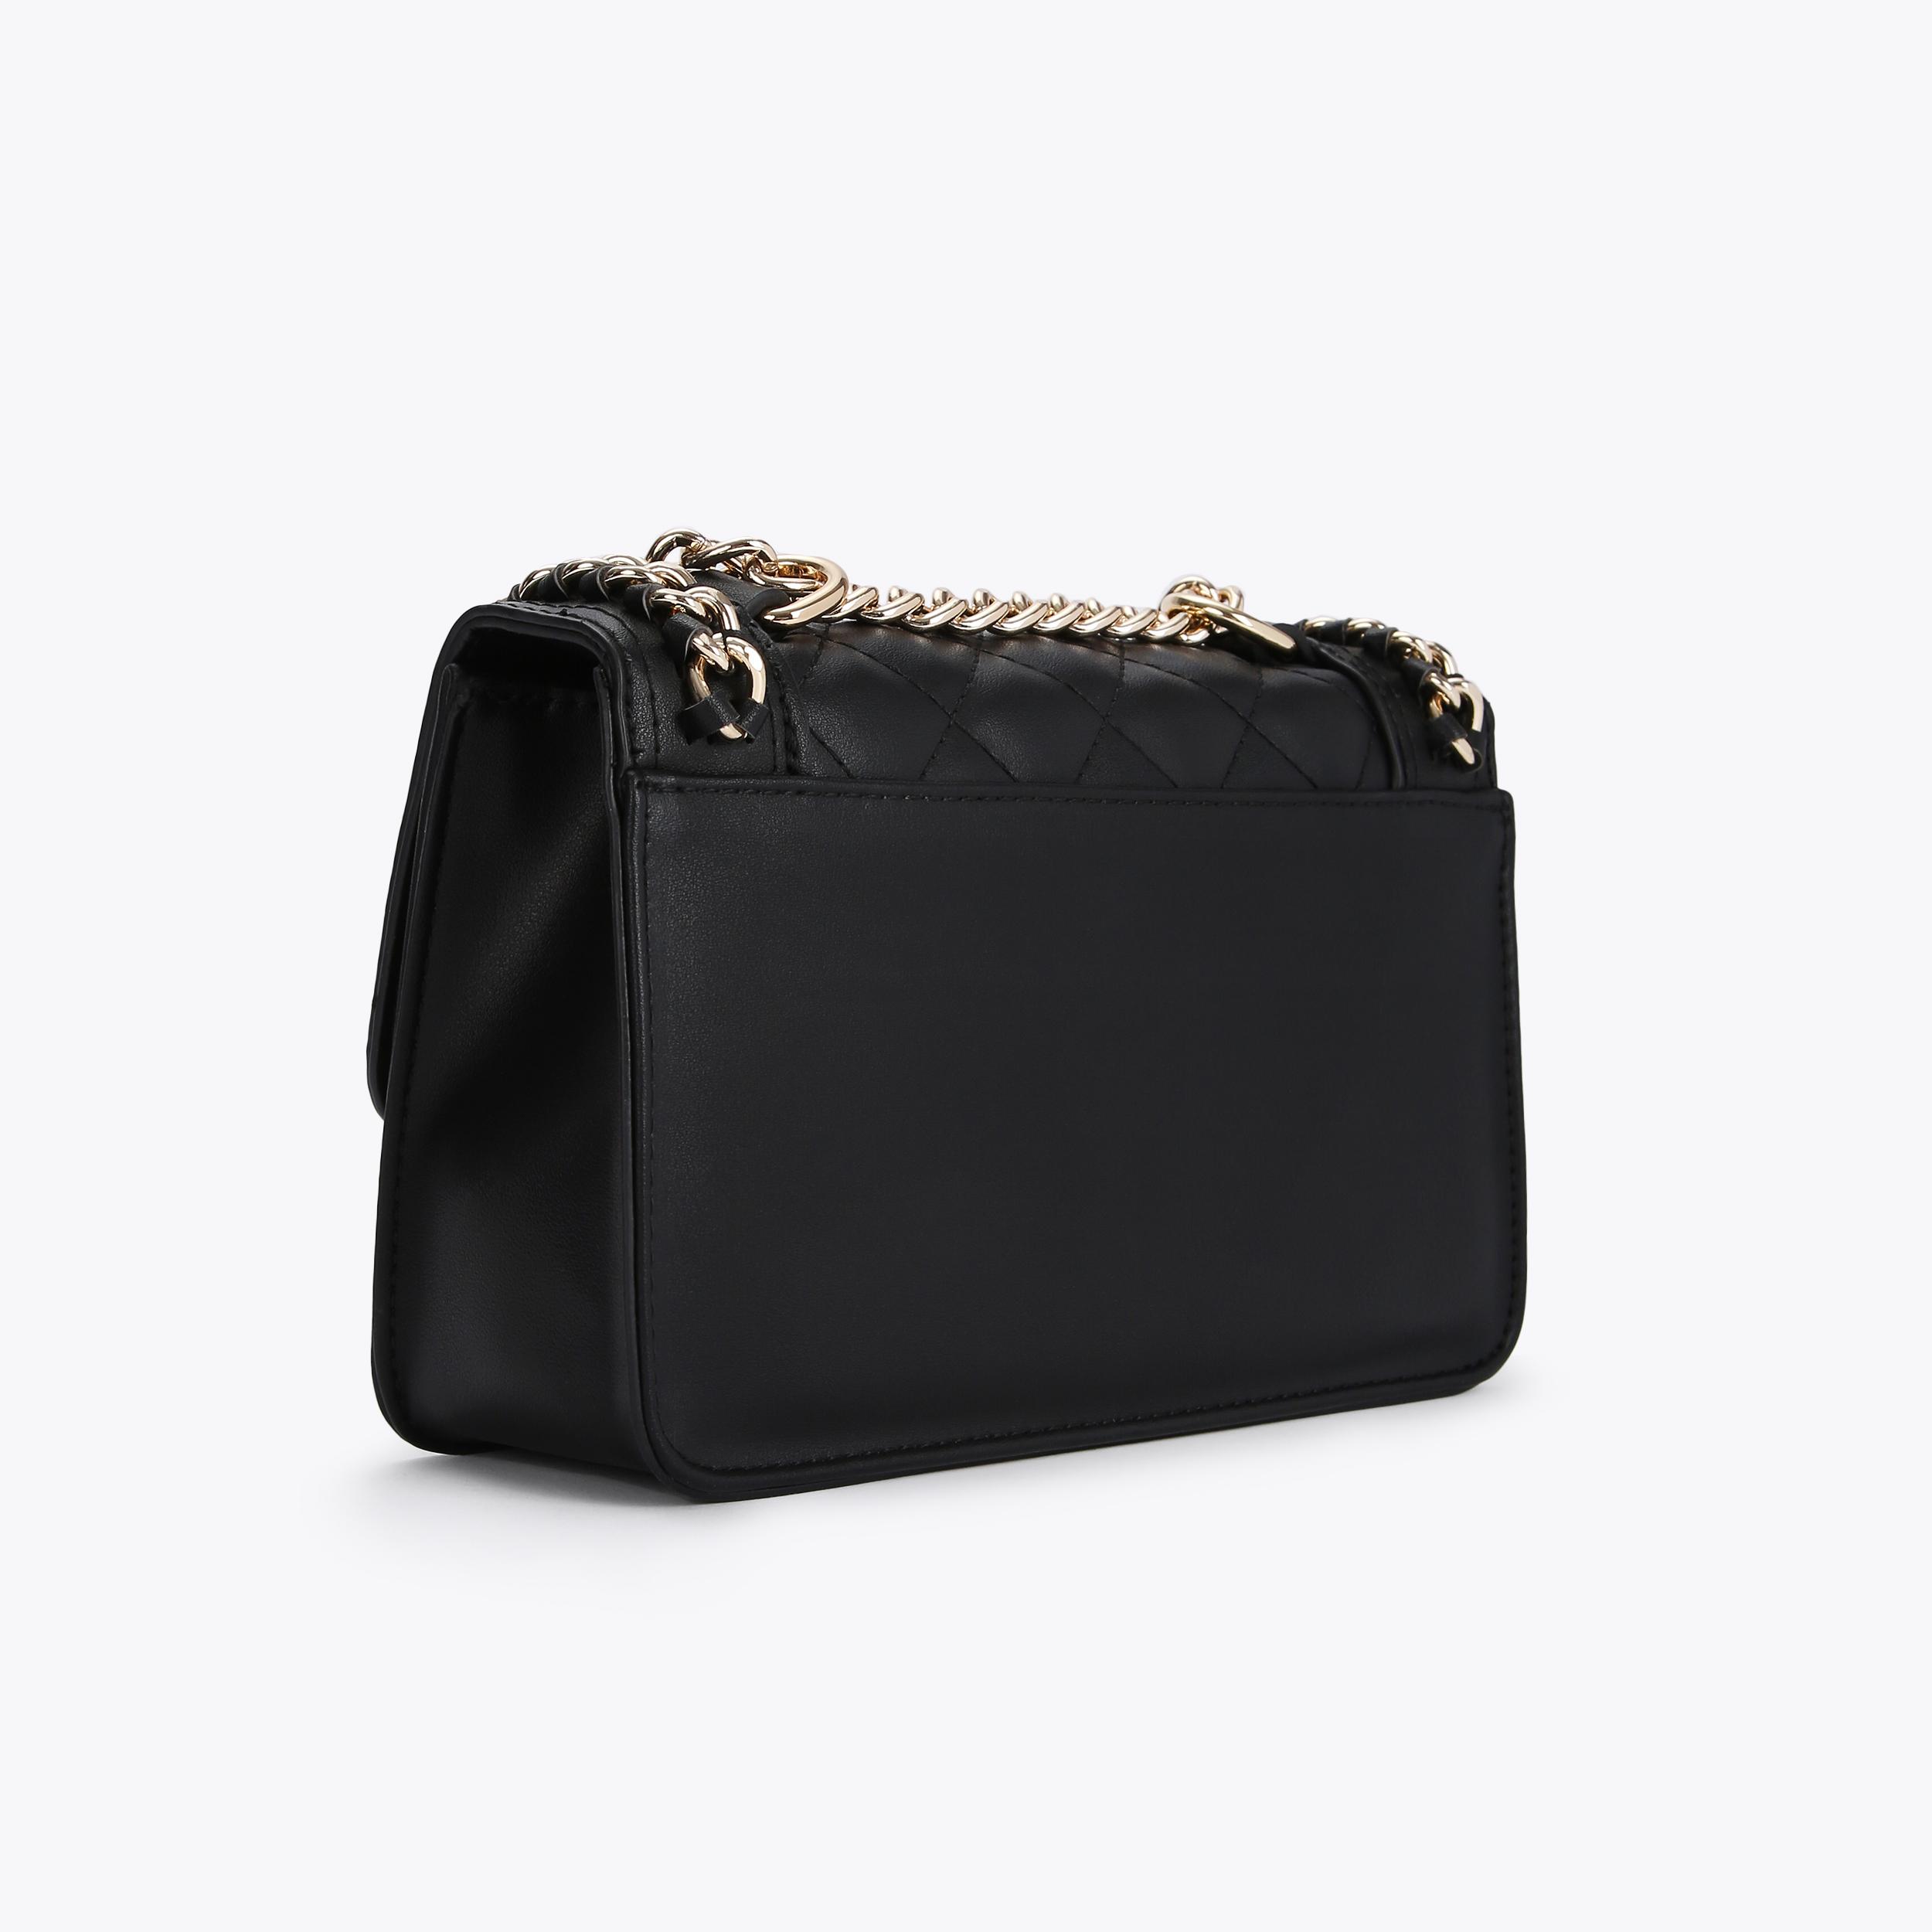 MINI BAILEY X BODY Black Quilted Cross Body Bag by CARVELA